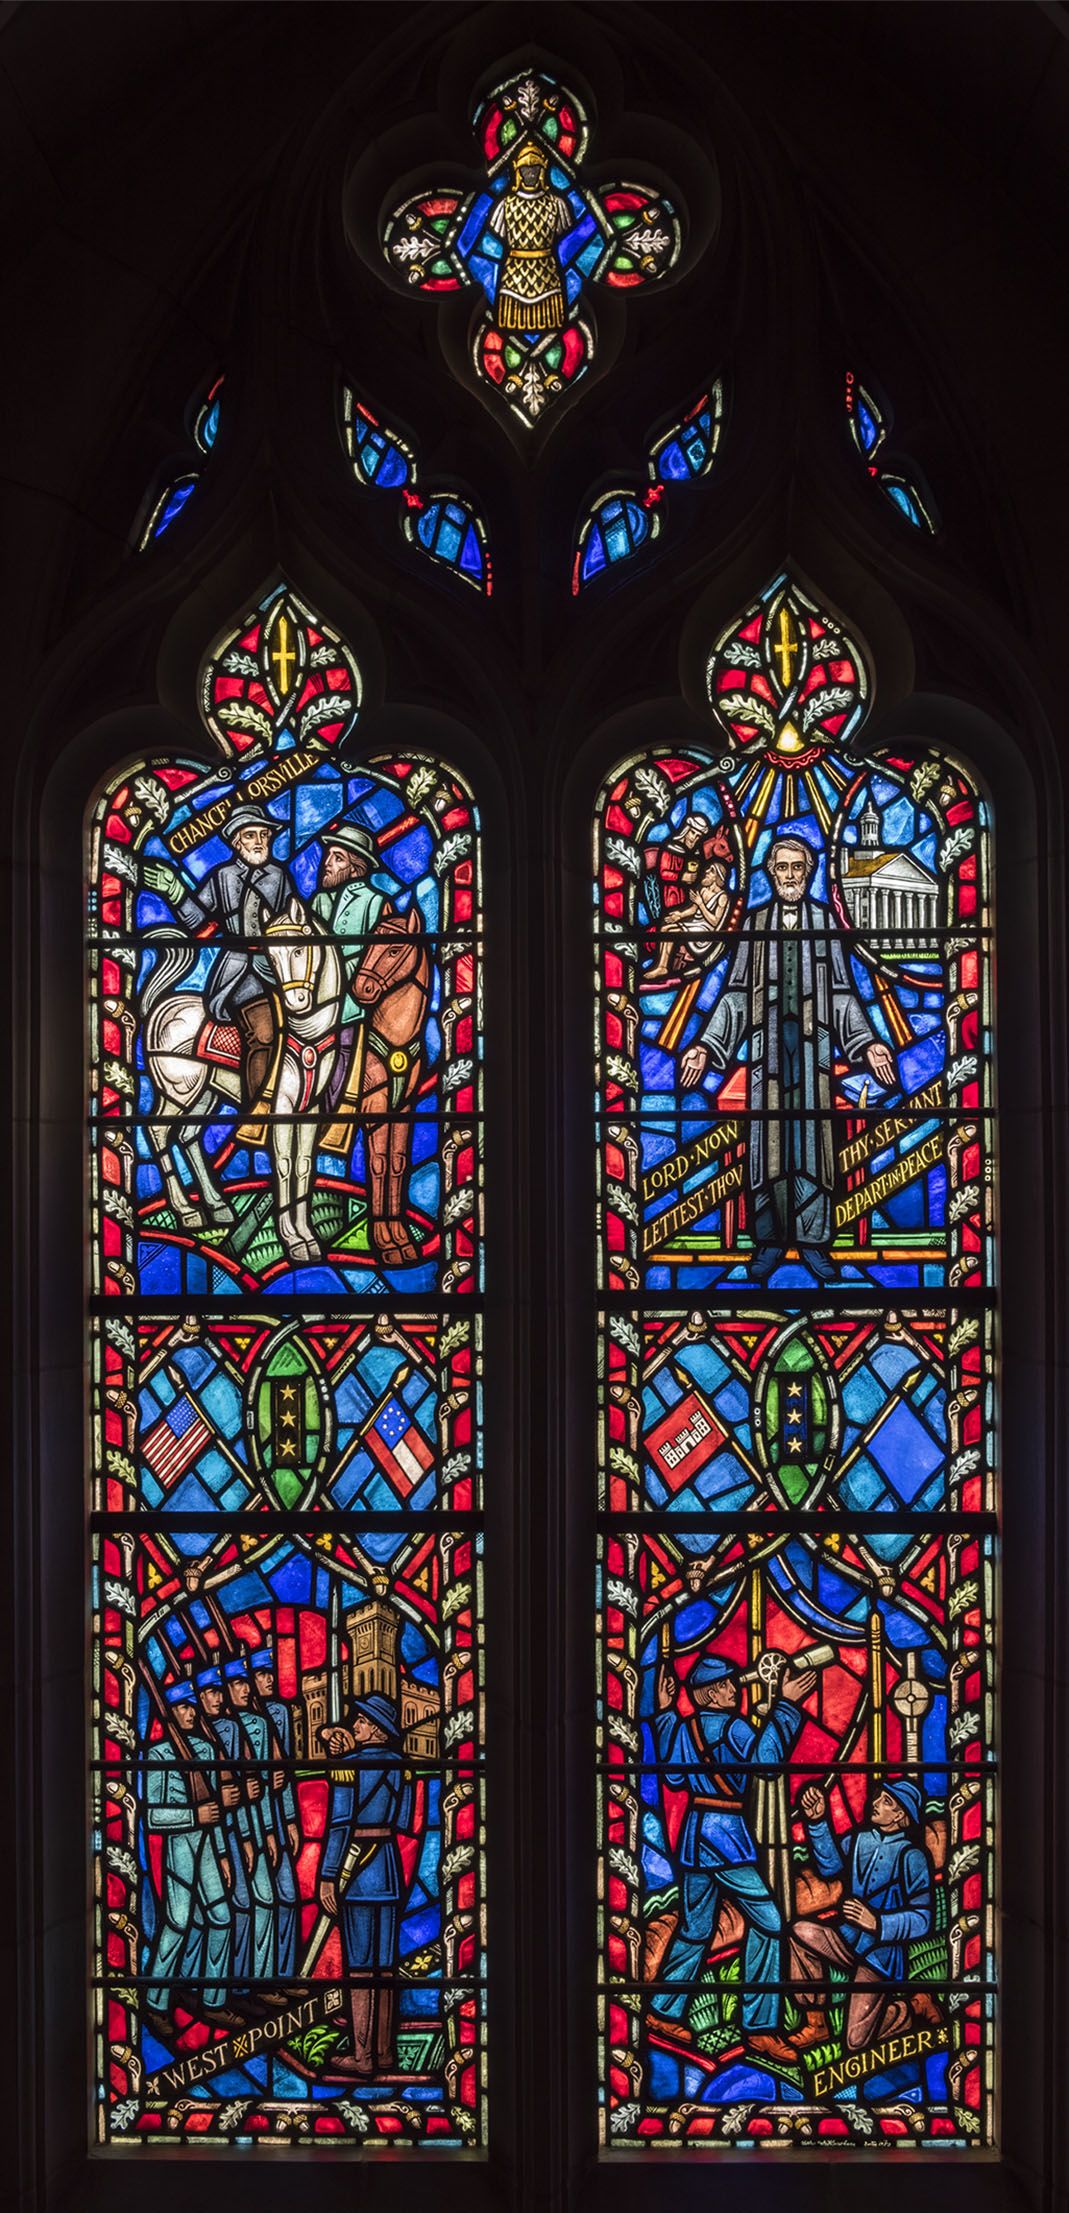 Stained glass window dedicated to Robert E Lee, rendered in bright blues and reds